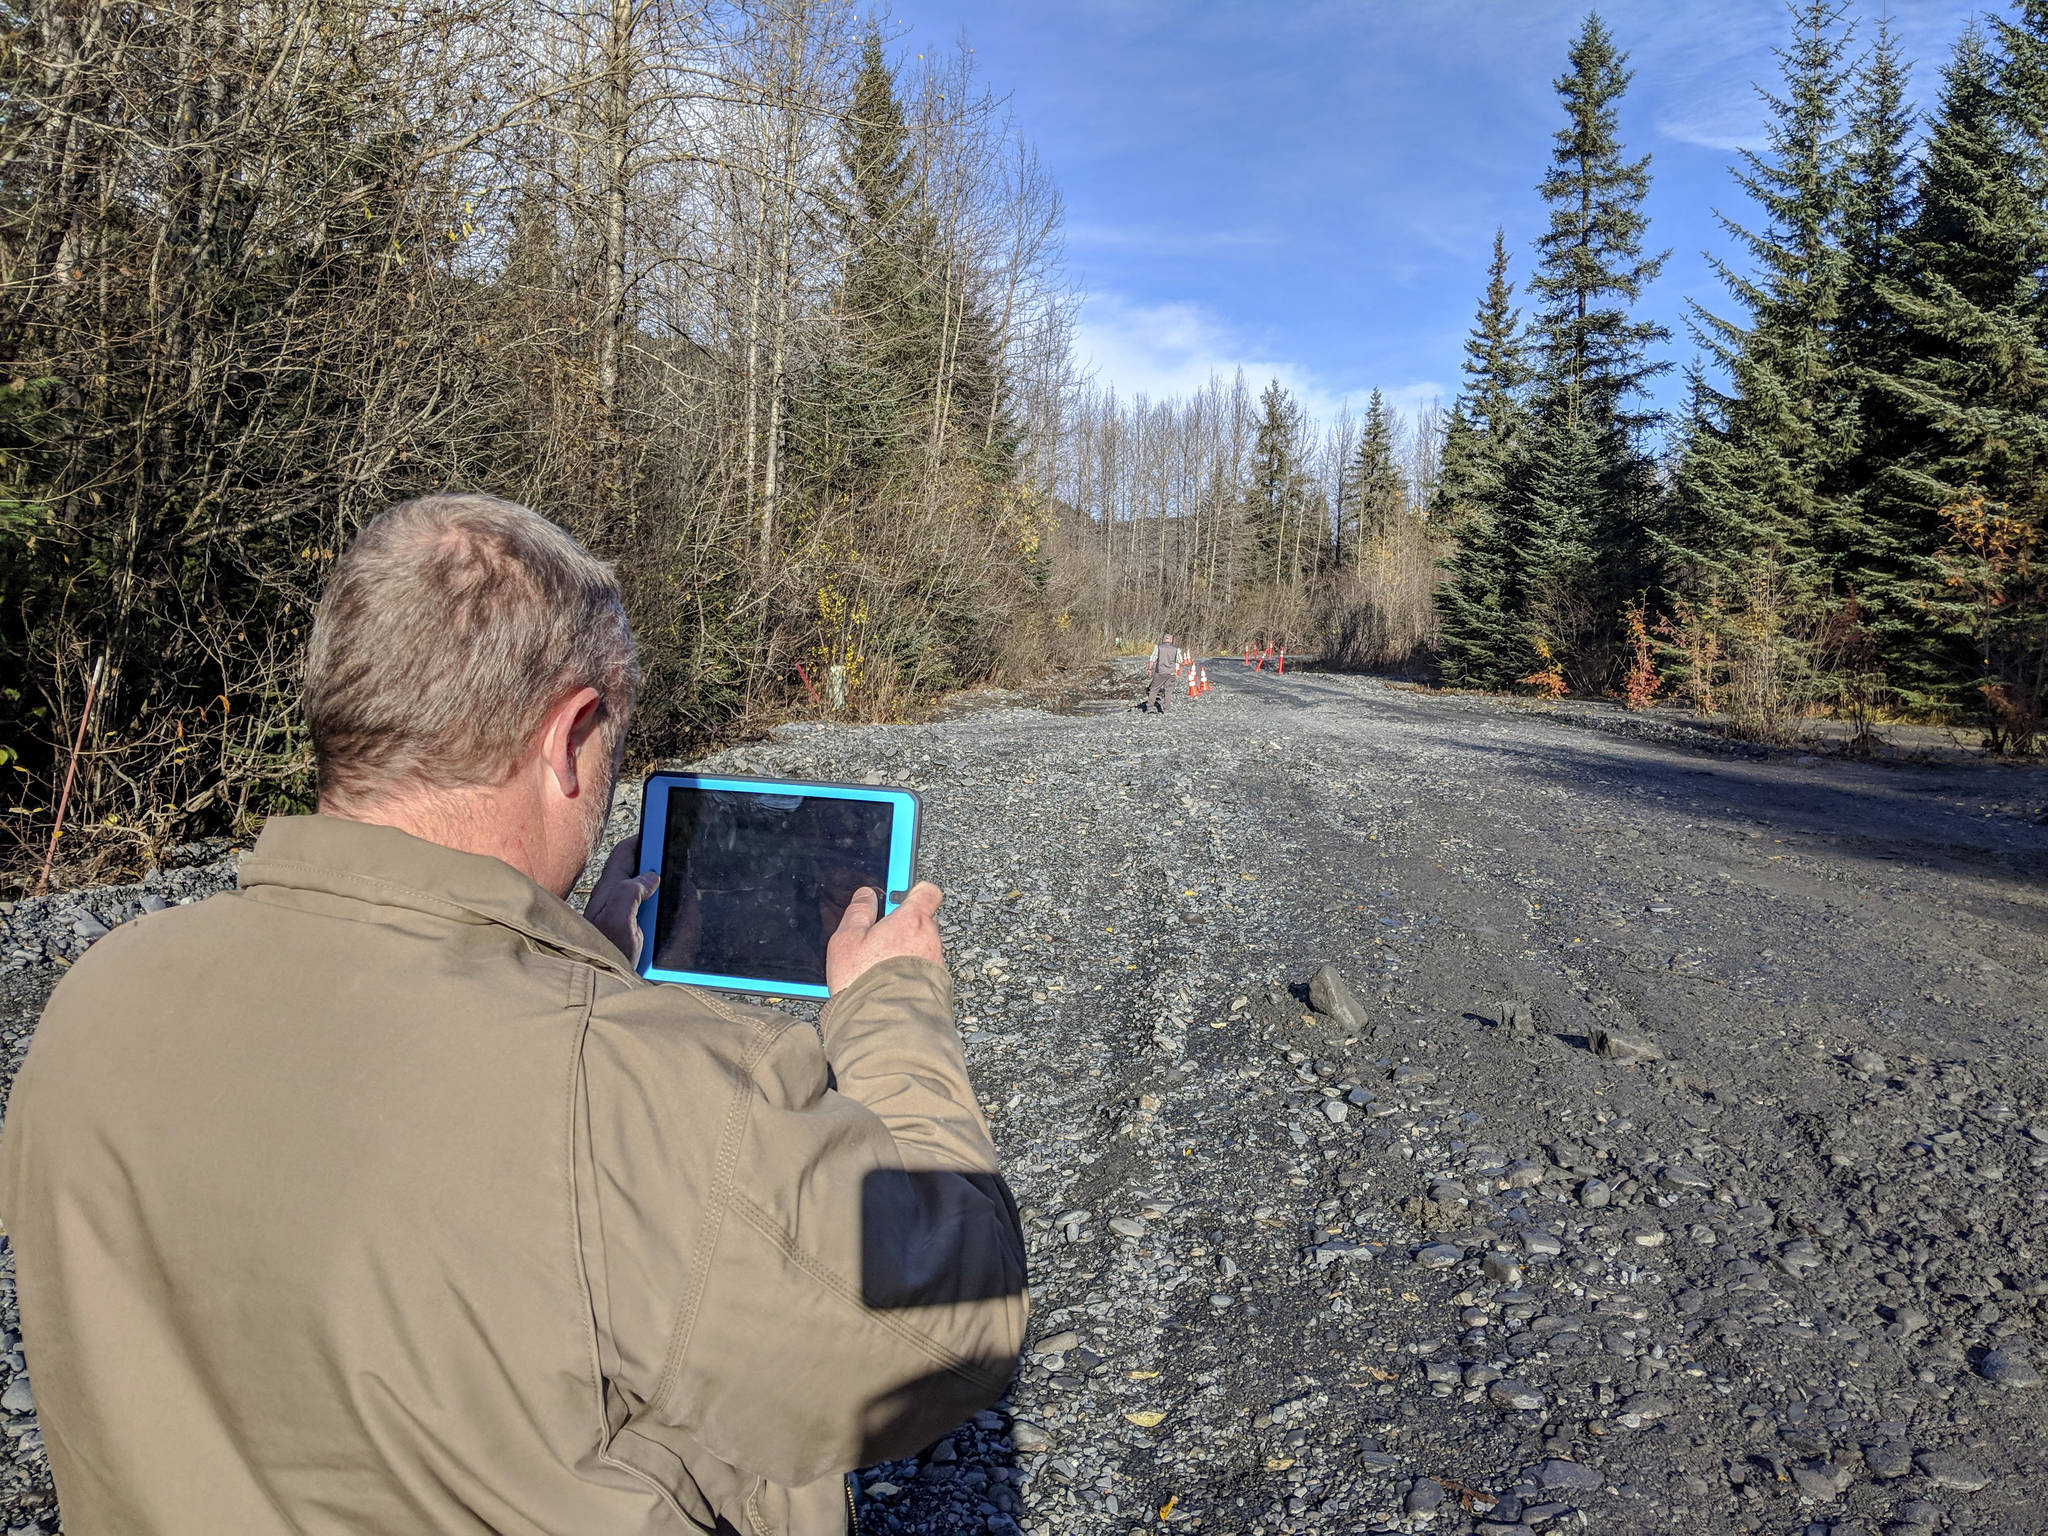 The Kenai Peninsula Borough Incident Management Team conducts a damage assessment Monday of areas impacted by severe flooding throughout Seward. (Photo courtesy Kenai Peninsula Borough Incident Management Team)